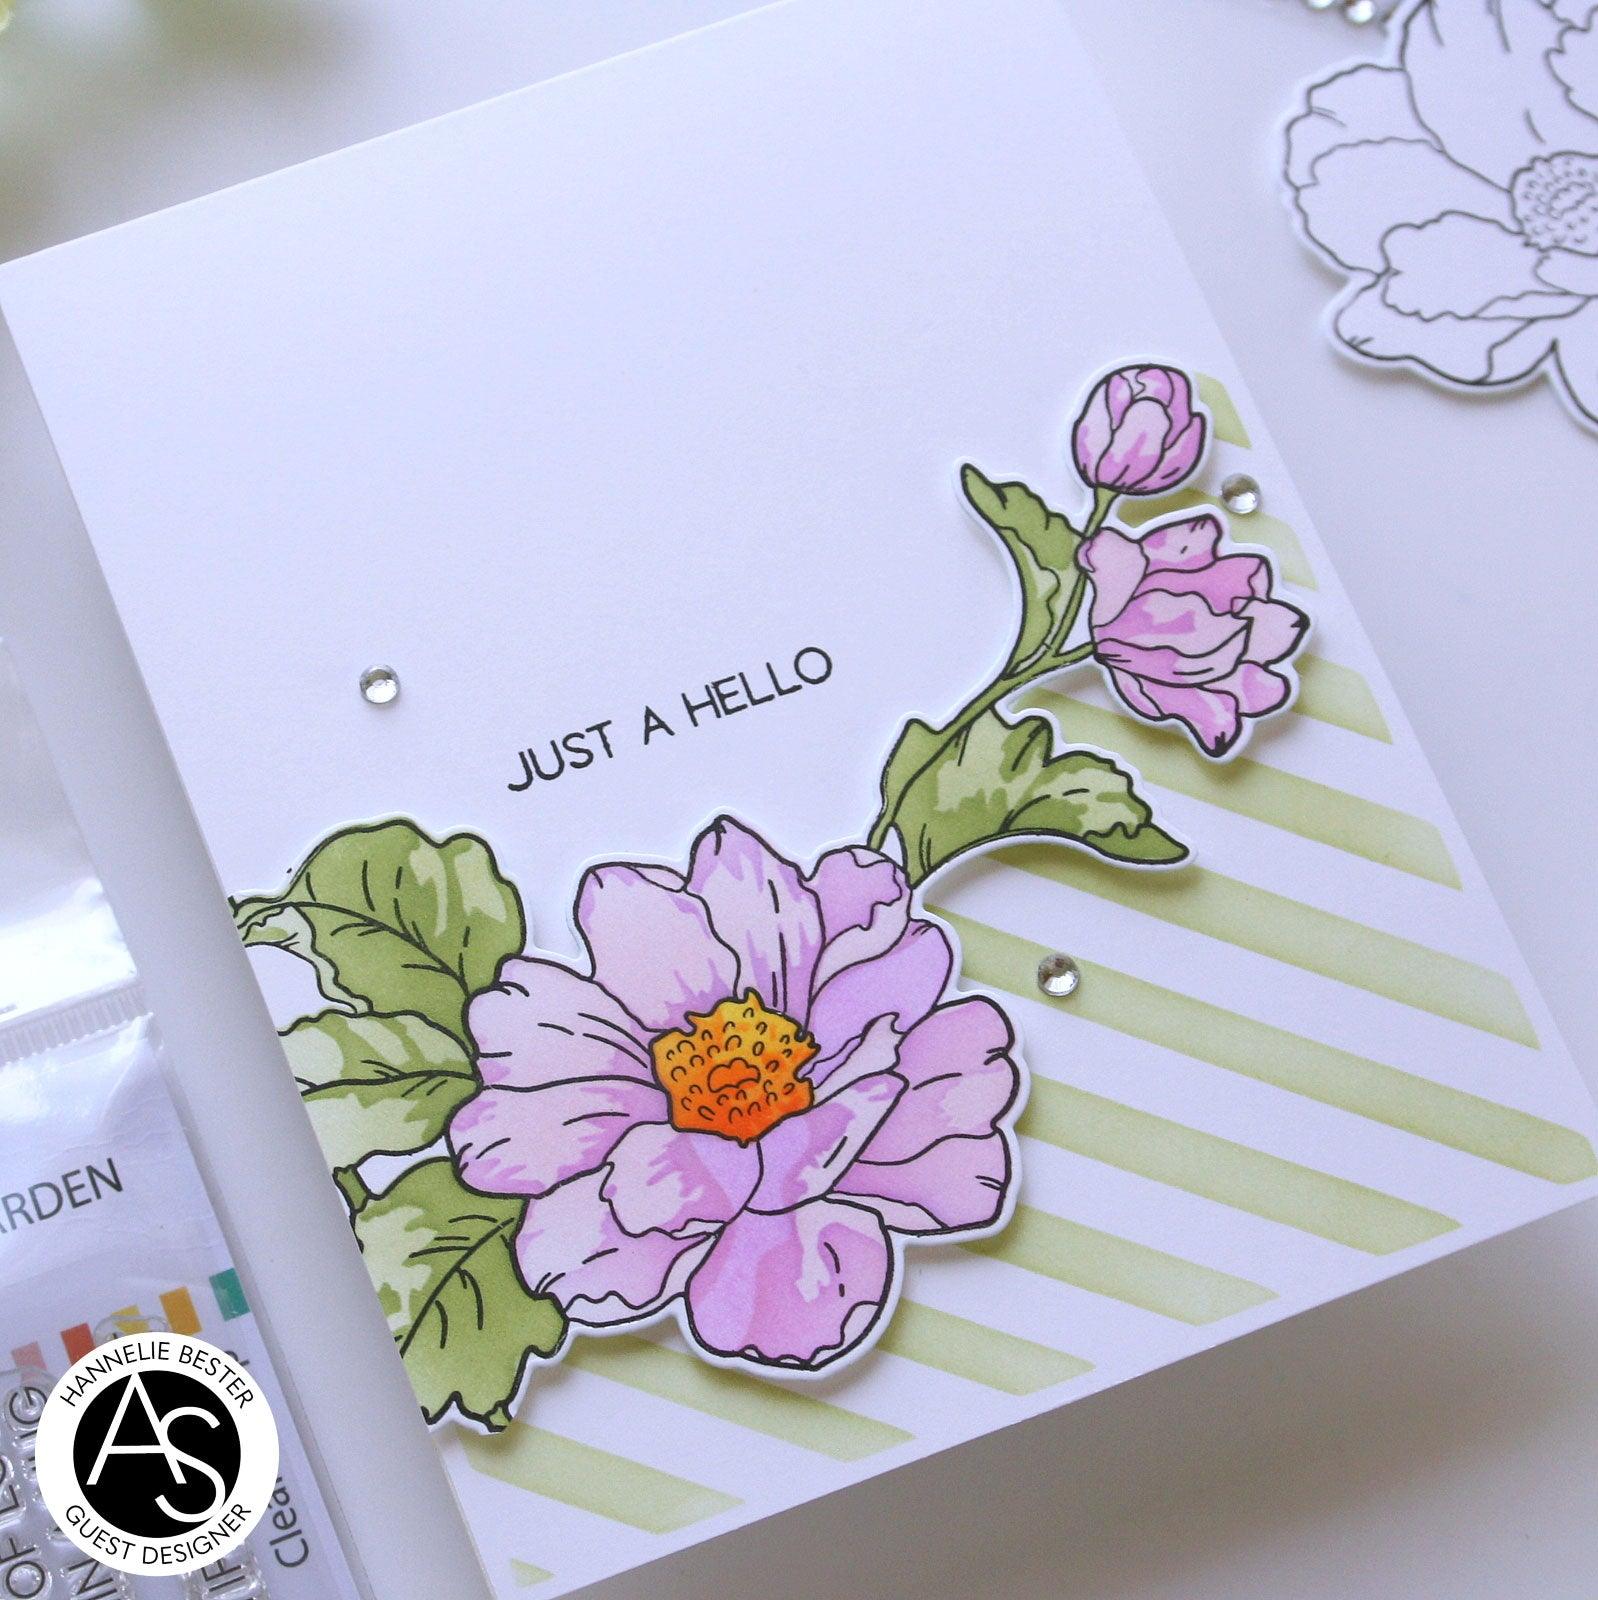 spring-garden-stamp-set-layering-stencil-alex-syberia-designs-flowers-coloring-cardmaking-tutorials-blog-love-you-cascards-clean-and-simple-cards